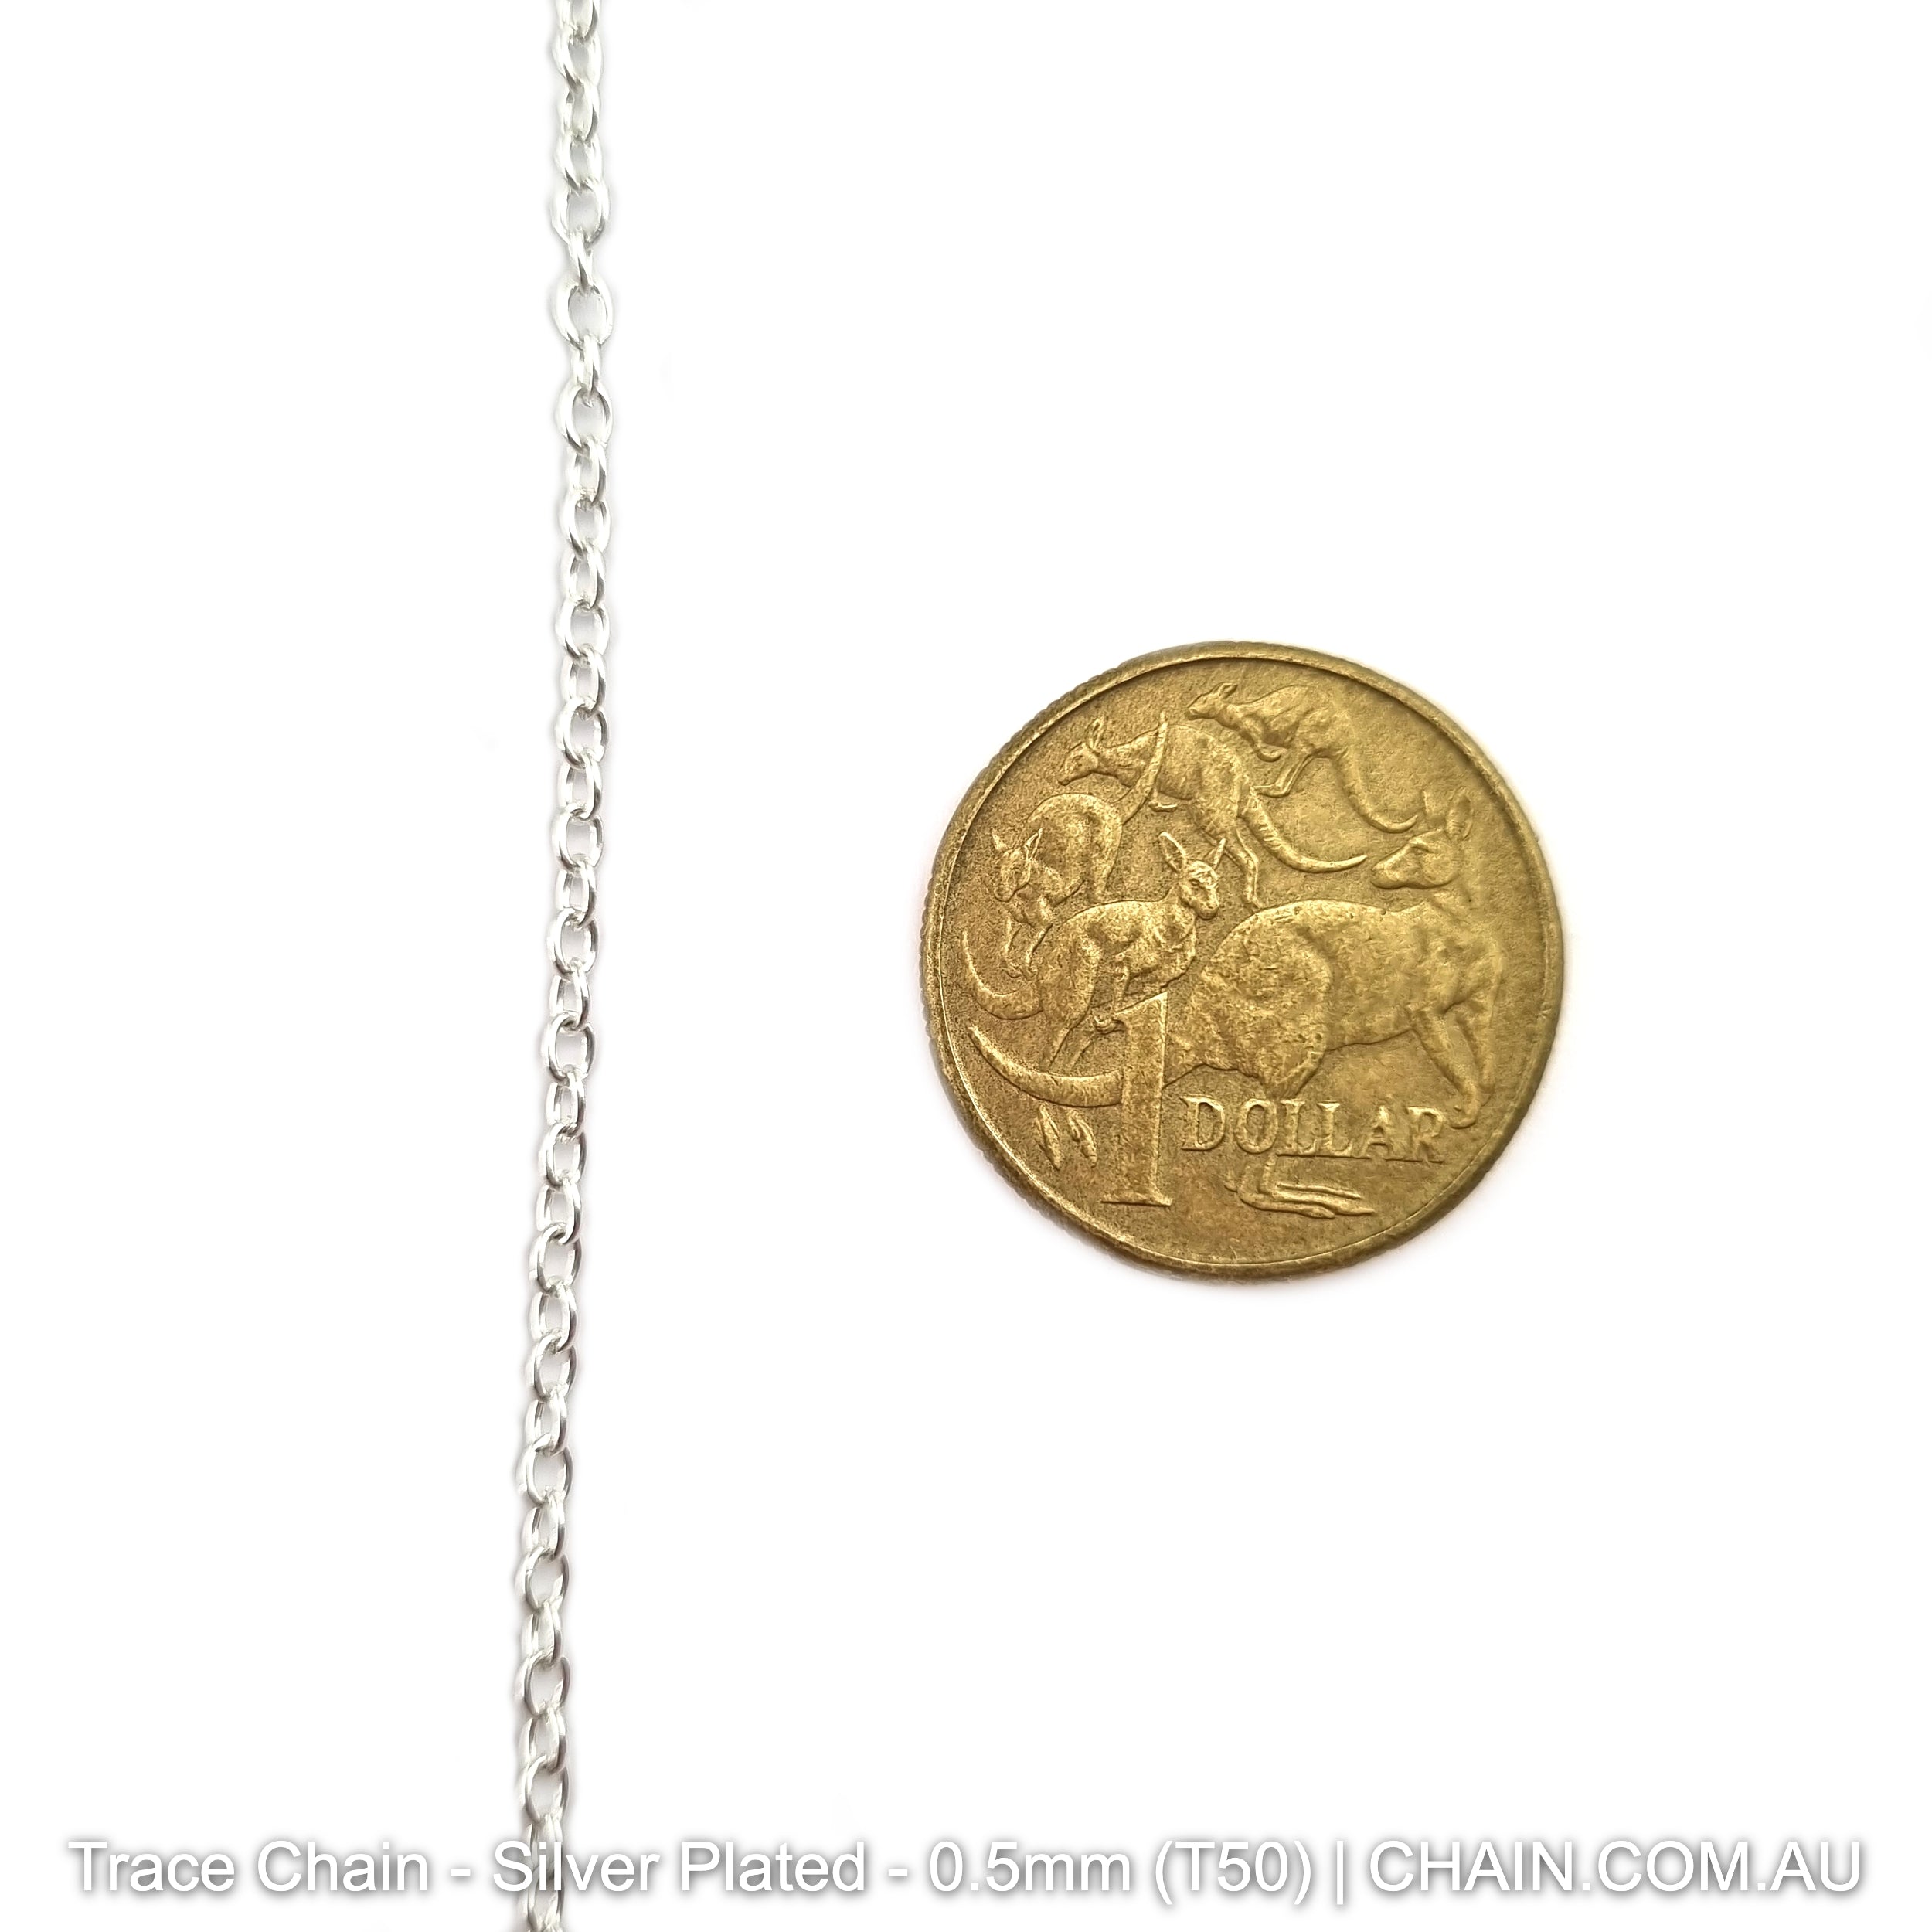 Trace Chain in a Silver Plated Finish. Size: 0.5mm, T50. Jewellery Chain, Australia wide shipping. Shop chain.com.au